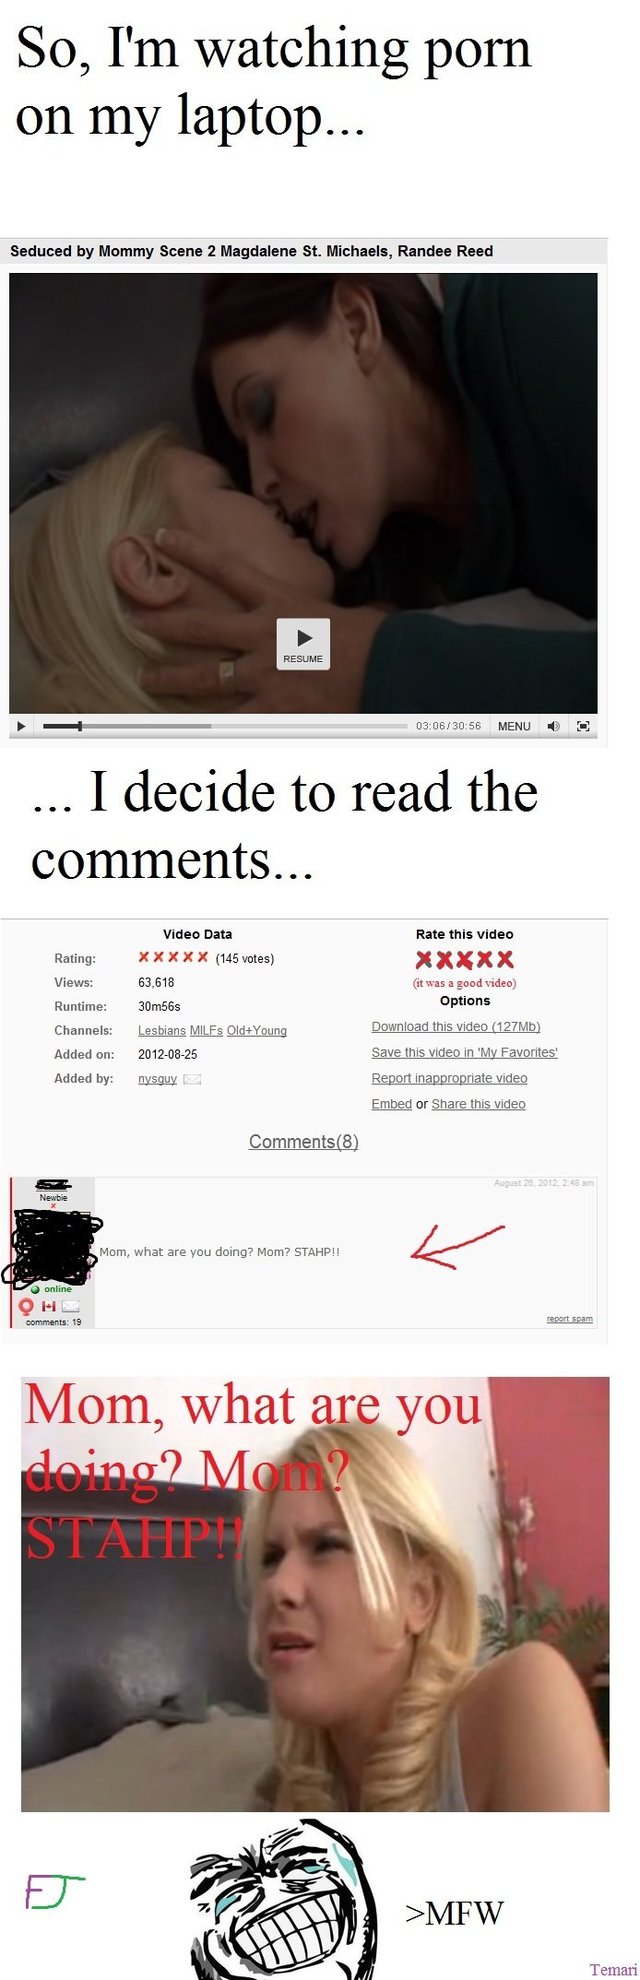 movie porn porn win videos pictures funny are comment comments